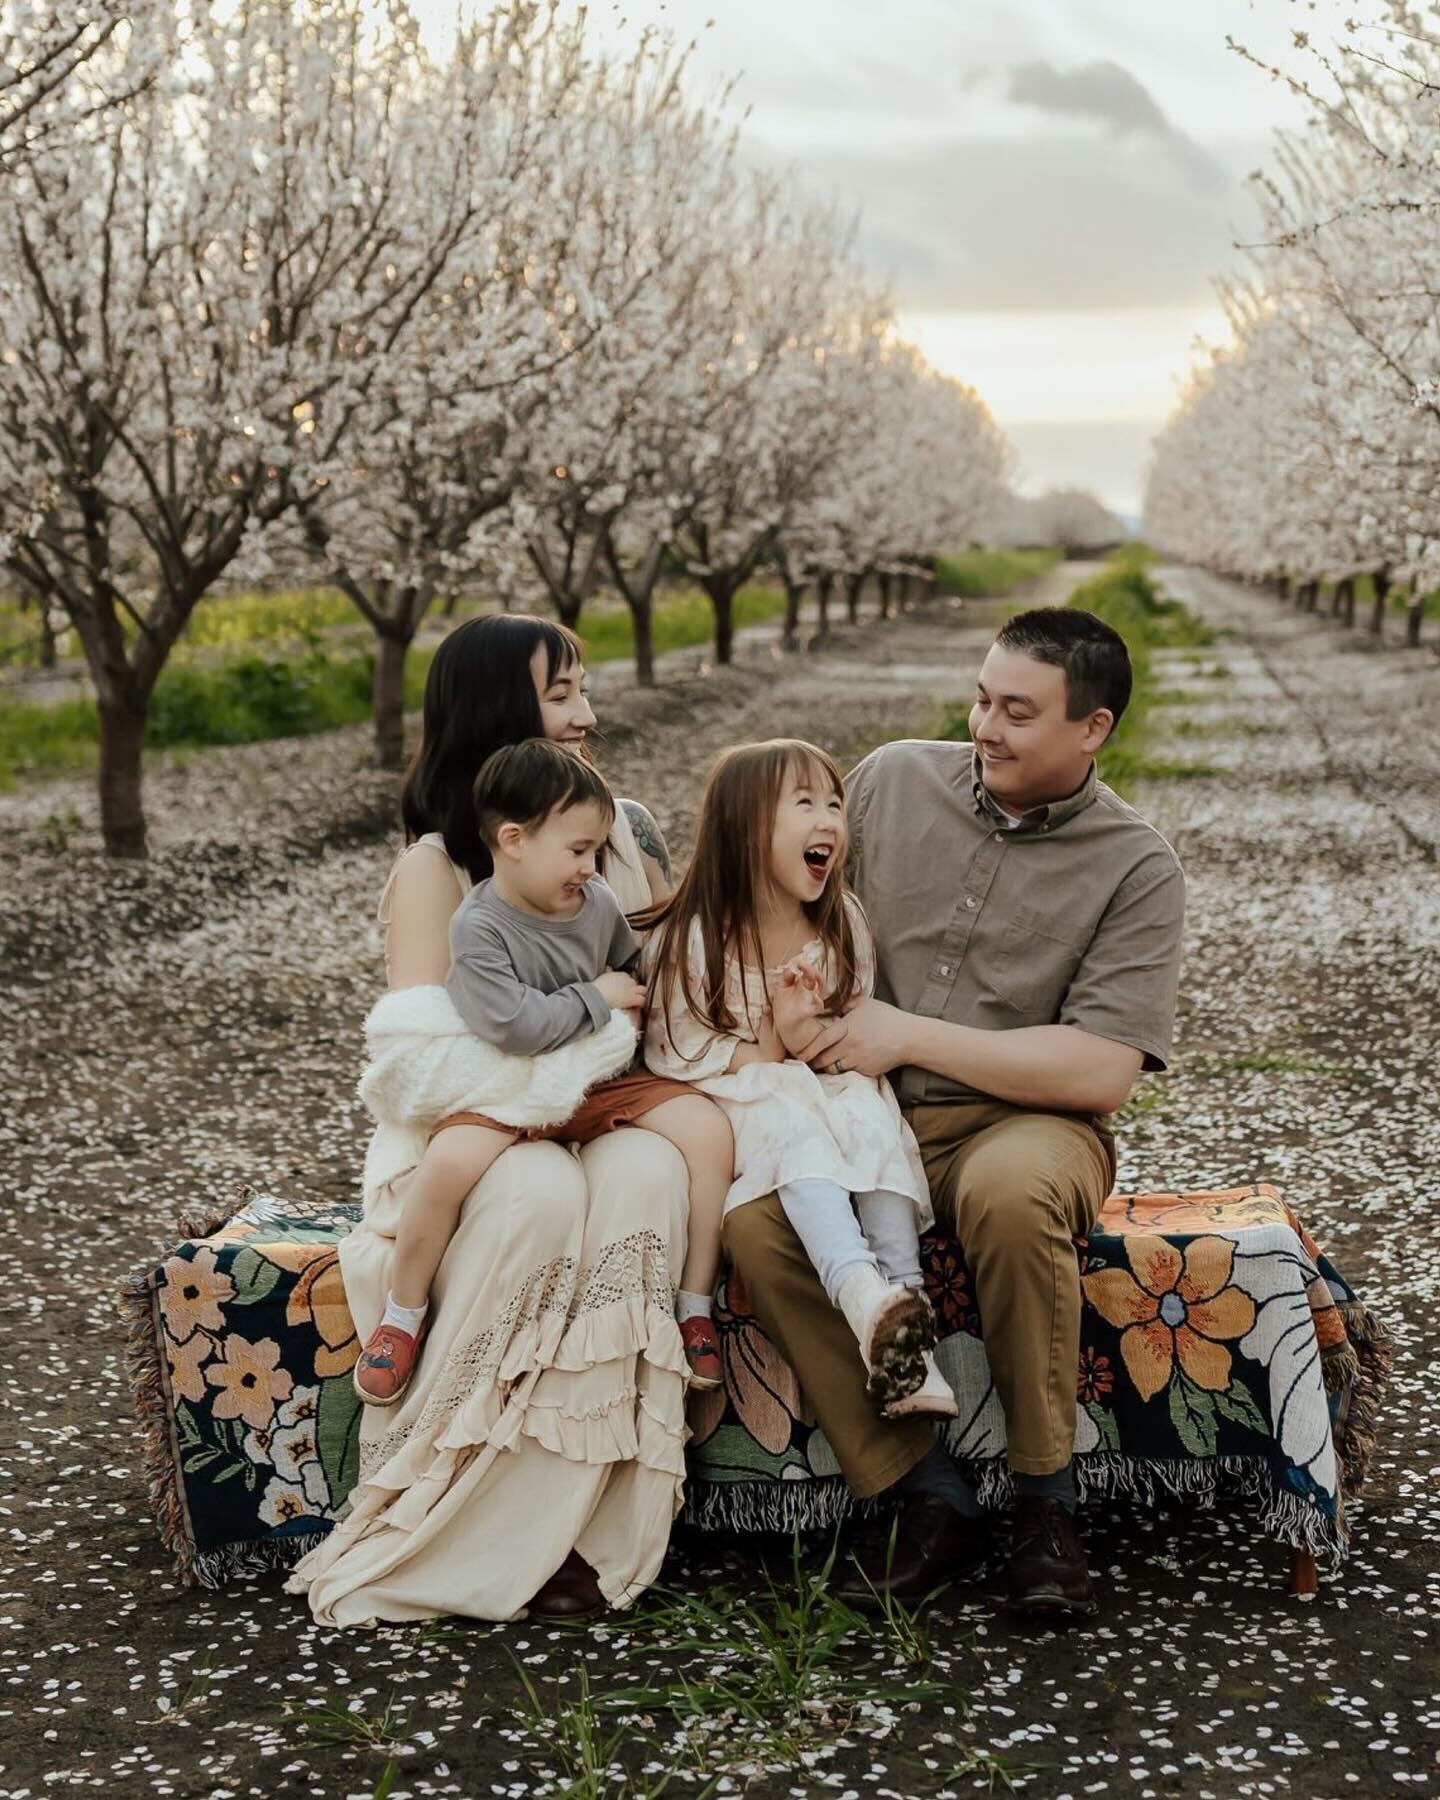 The start of the almond blossom season was absolutely magical! There&rsquo;s something truly special about witnessing the almond trees in full bloom, their delicate blossoms creating a stunning display of nature&rsquo;s beauty. And what better way to